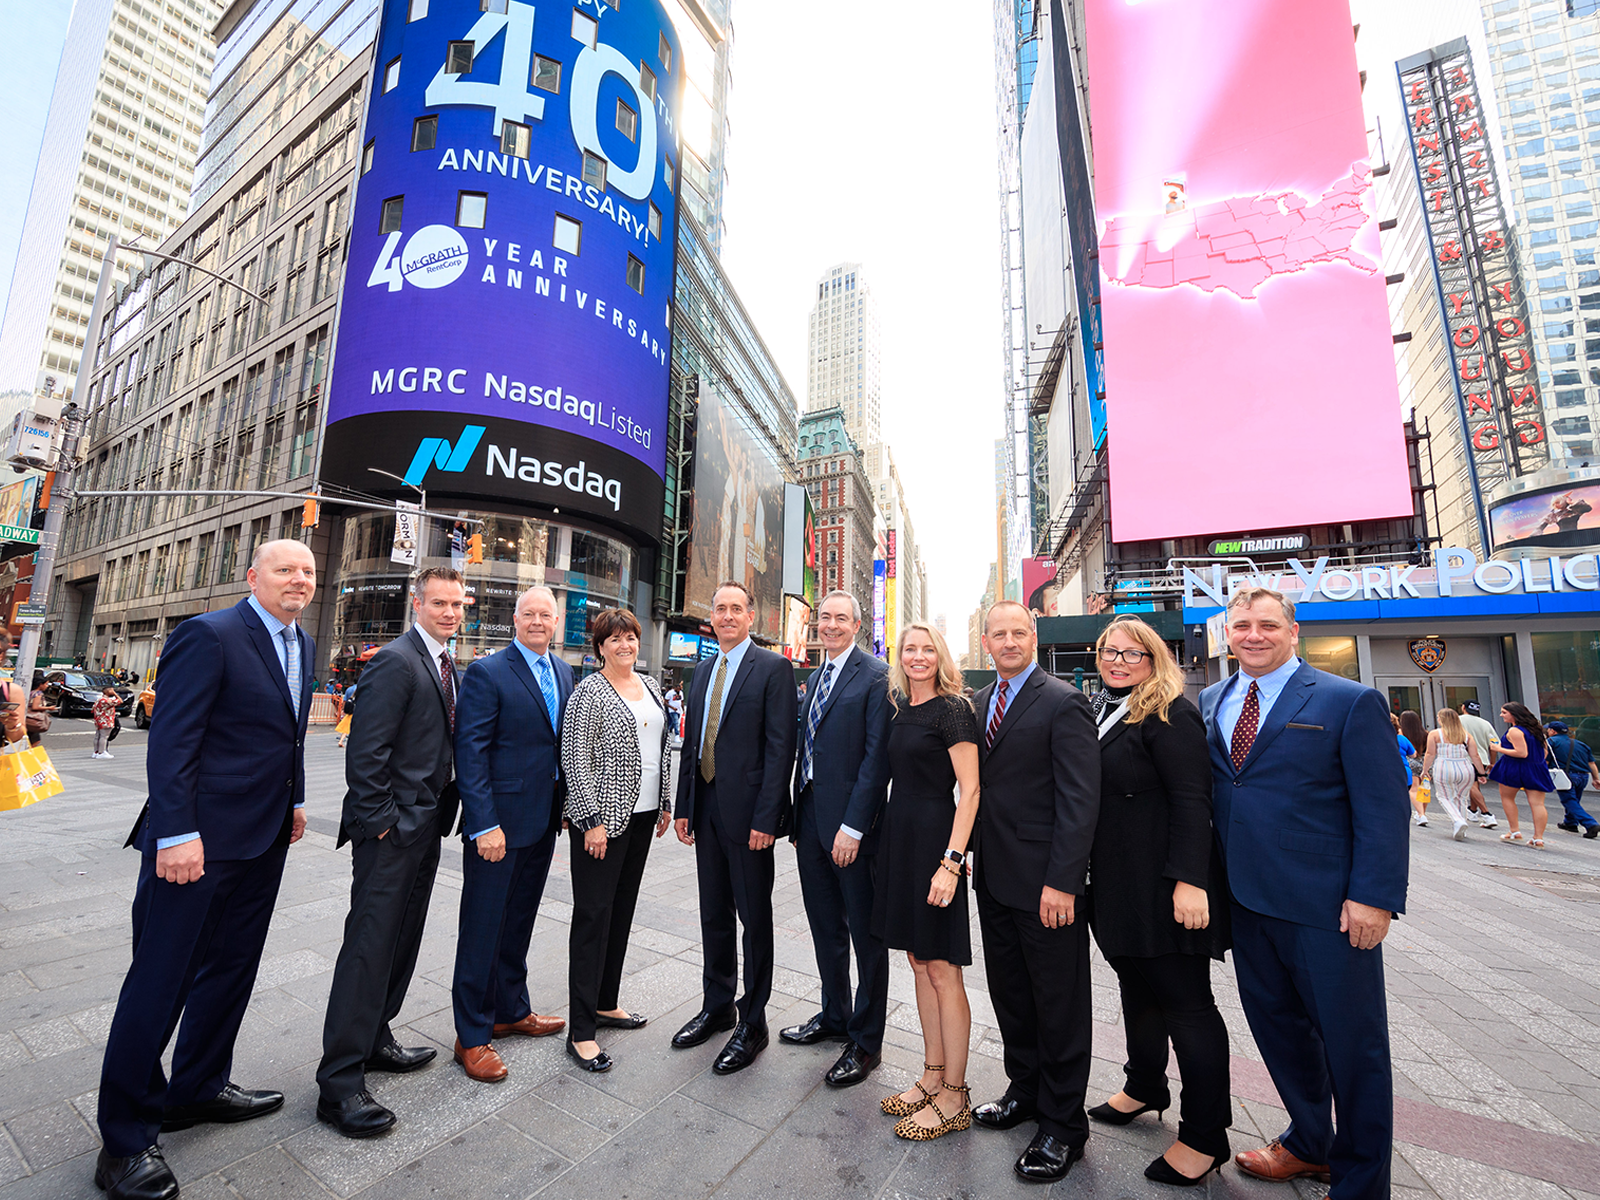 McGrath celebrates 40th anniversary and 35th year as a publicly traded company. Rings closing bell at Nasdaq